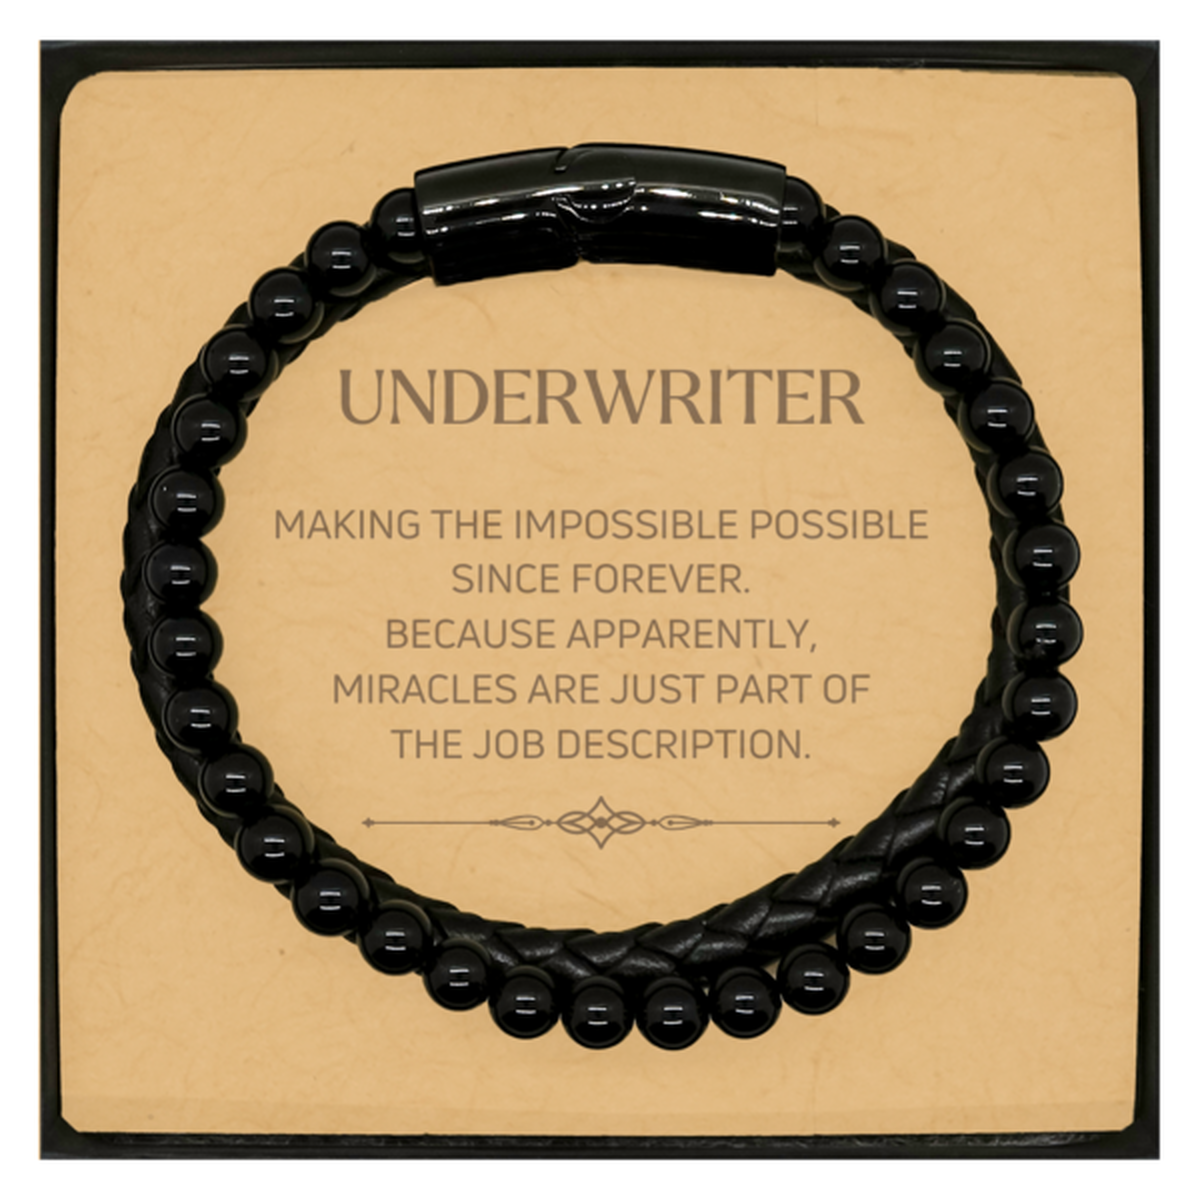 Funny Underwriter Gifts, Miracles are just part of the job description, Inspirational Birthday Christmas Stone Leather Bracelets For Underwriter, Men, Women, Coworkers, Friends, Boss